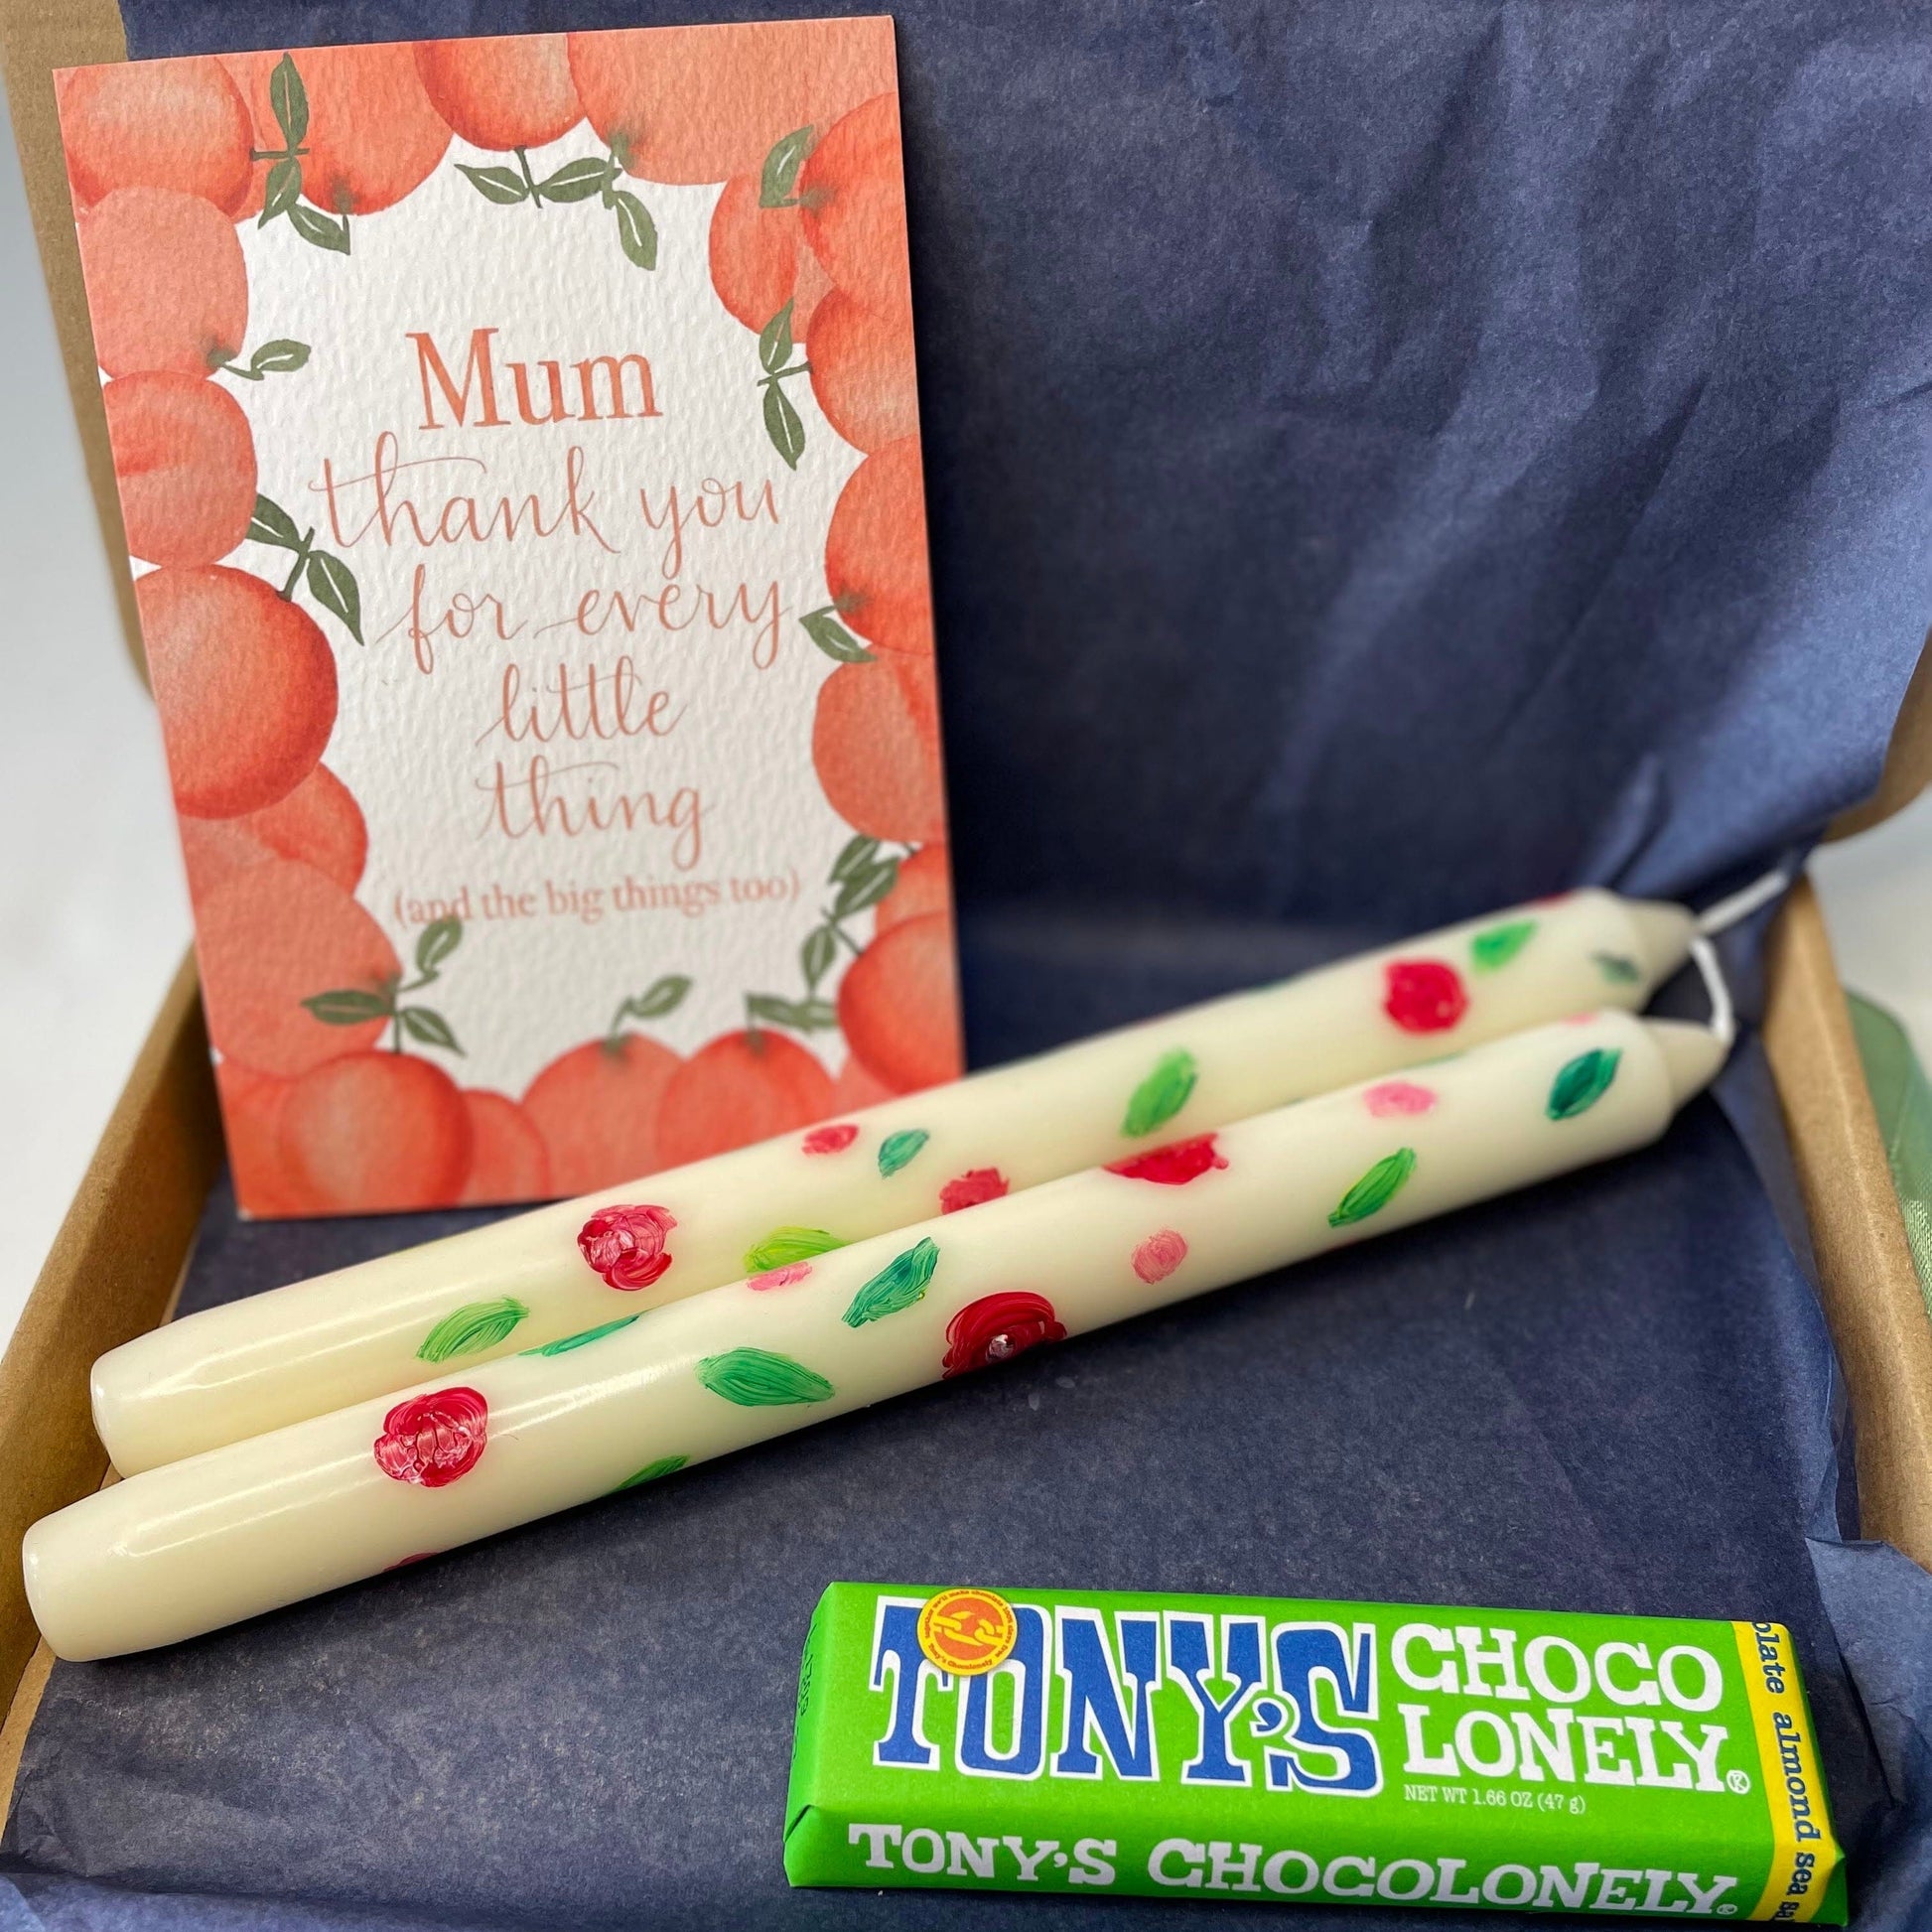 And Hope Designs Letterbox Gift Mother’s Day letterbox gift - candles and chocolate